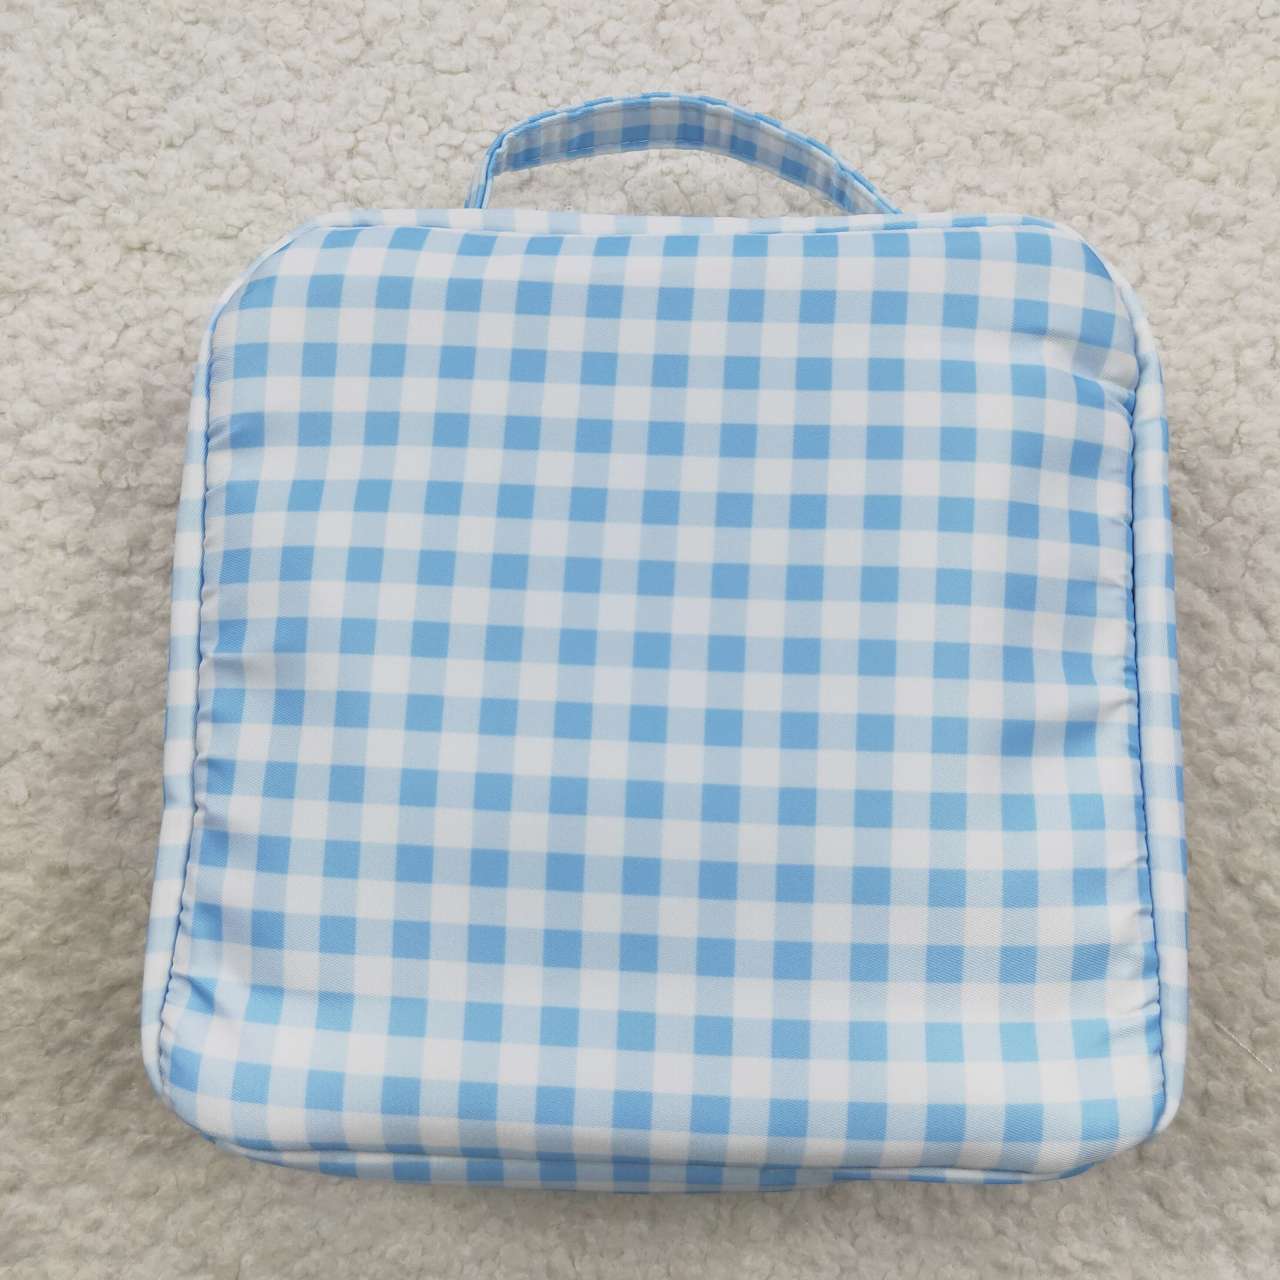 blue gingham meal box